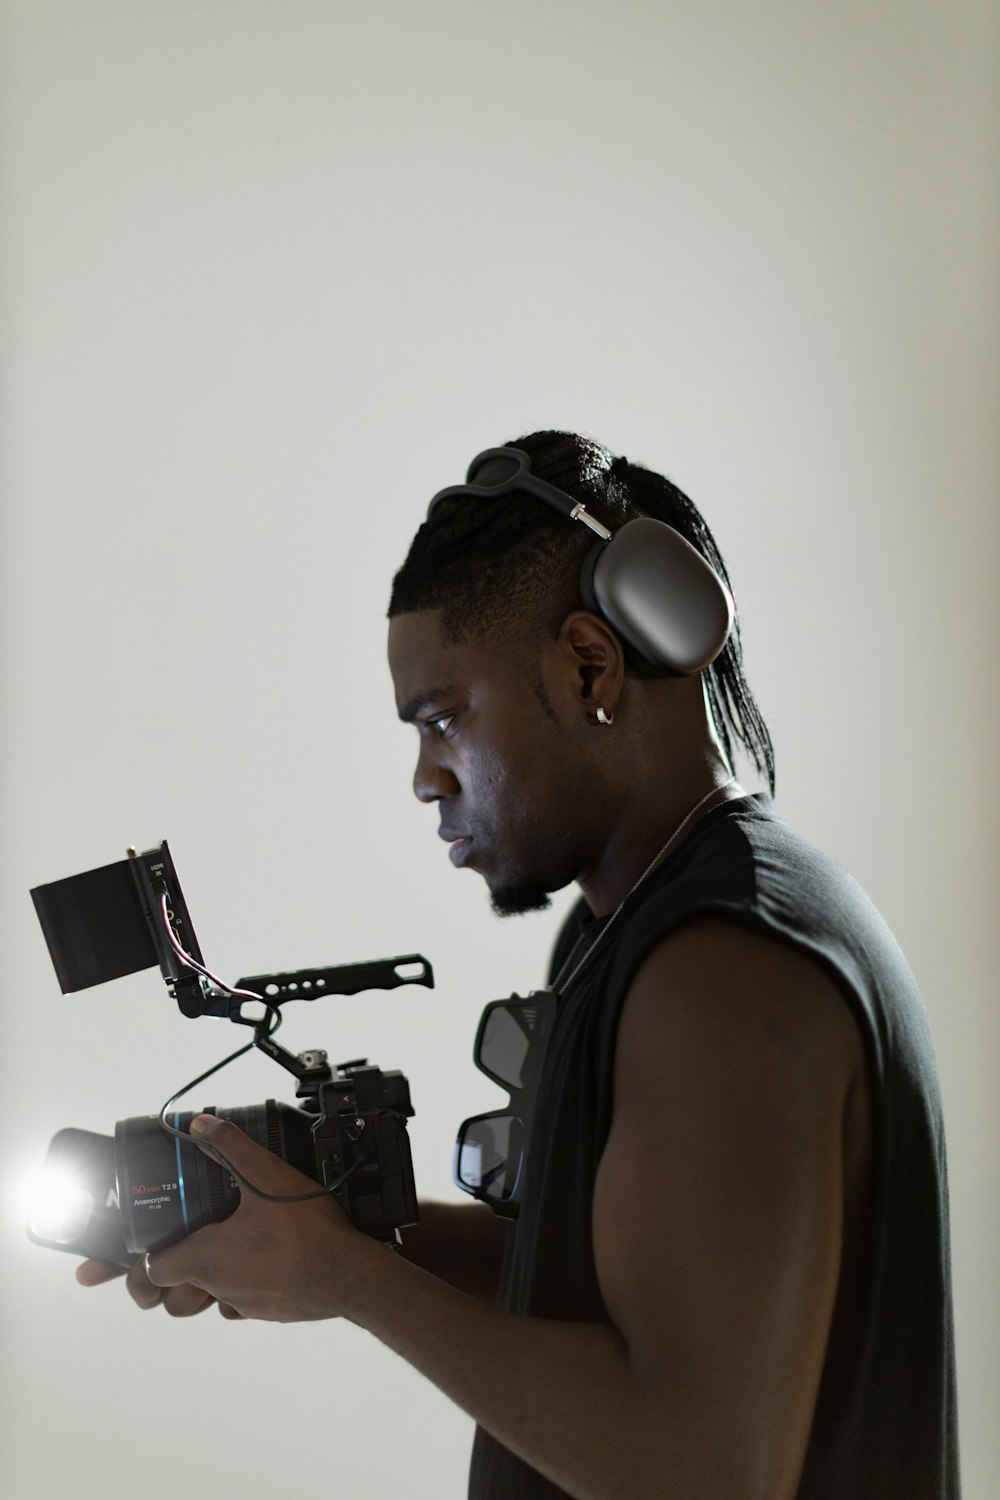 a man with headphones on holding a camera